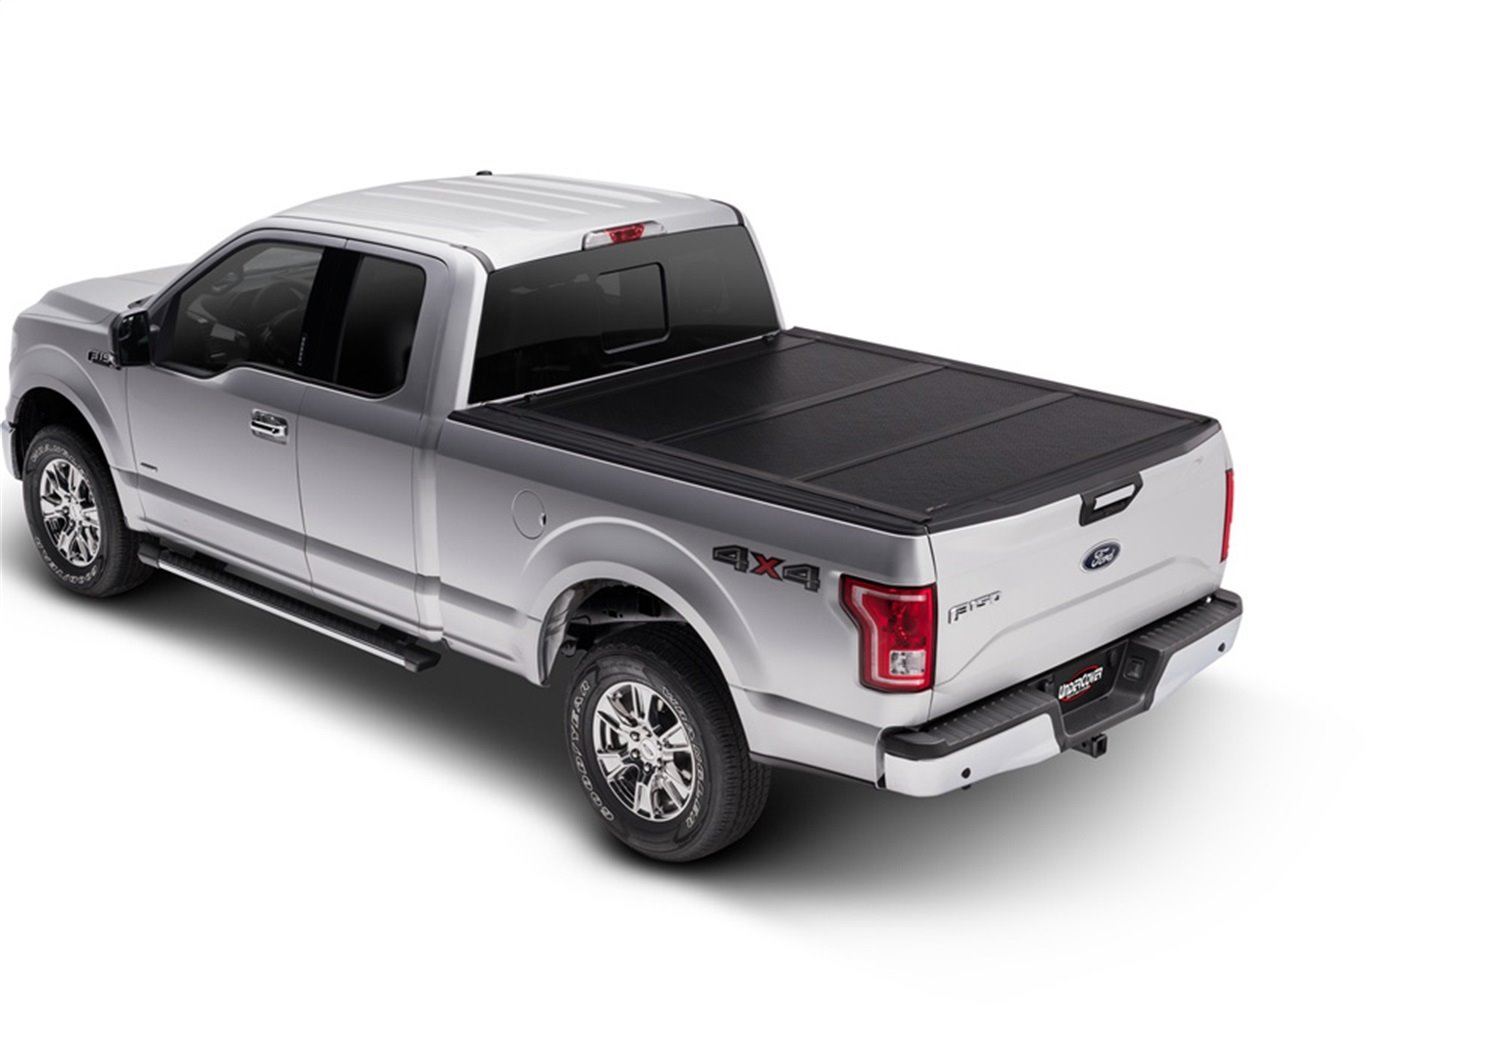 FX21019 Flex Hard Folding Cover, 2015-2020 Ford F-150 5'7" Bed EXT/Crew, Black Textured